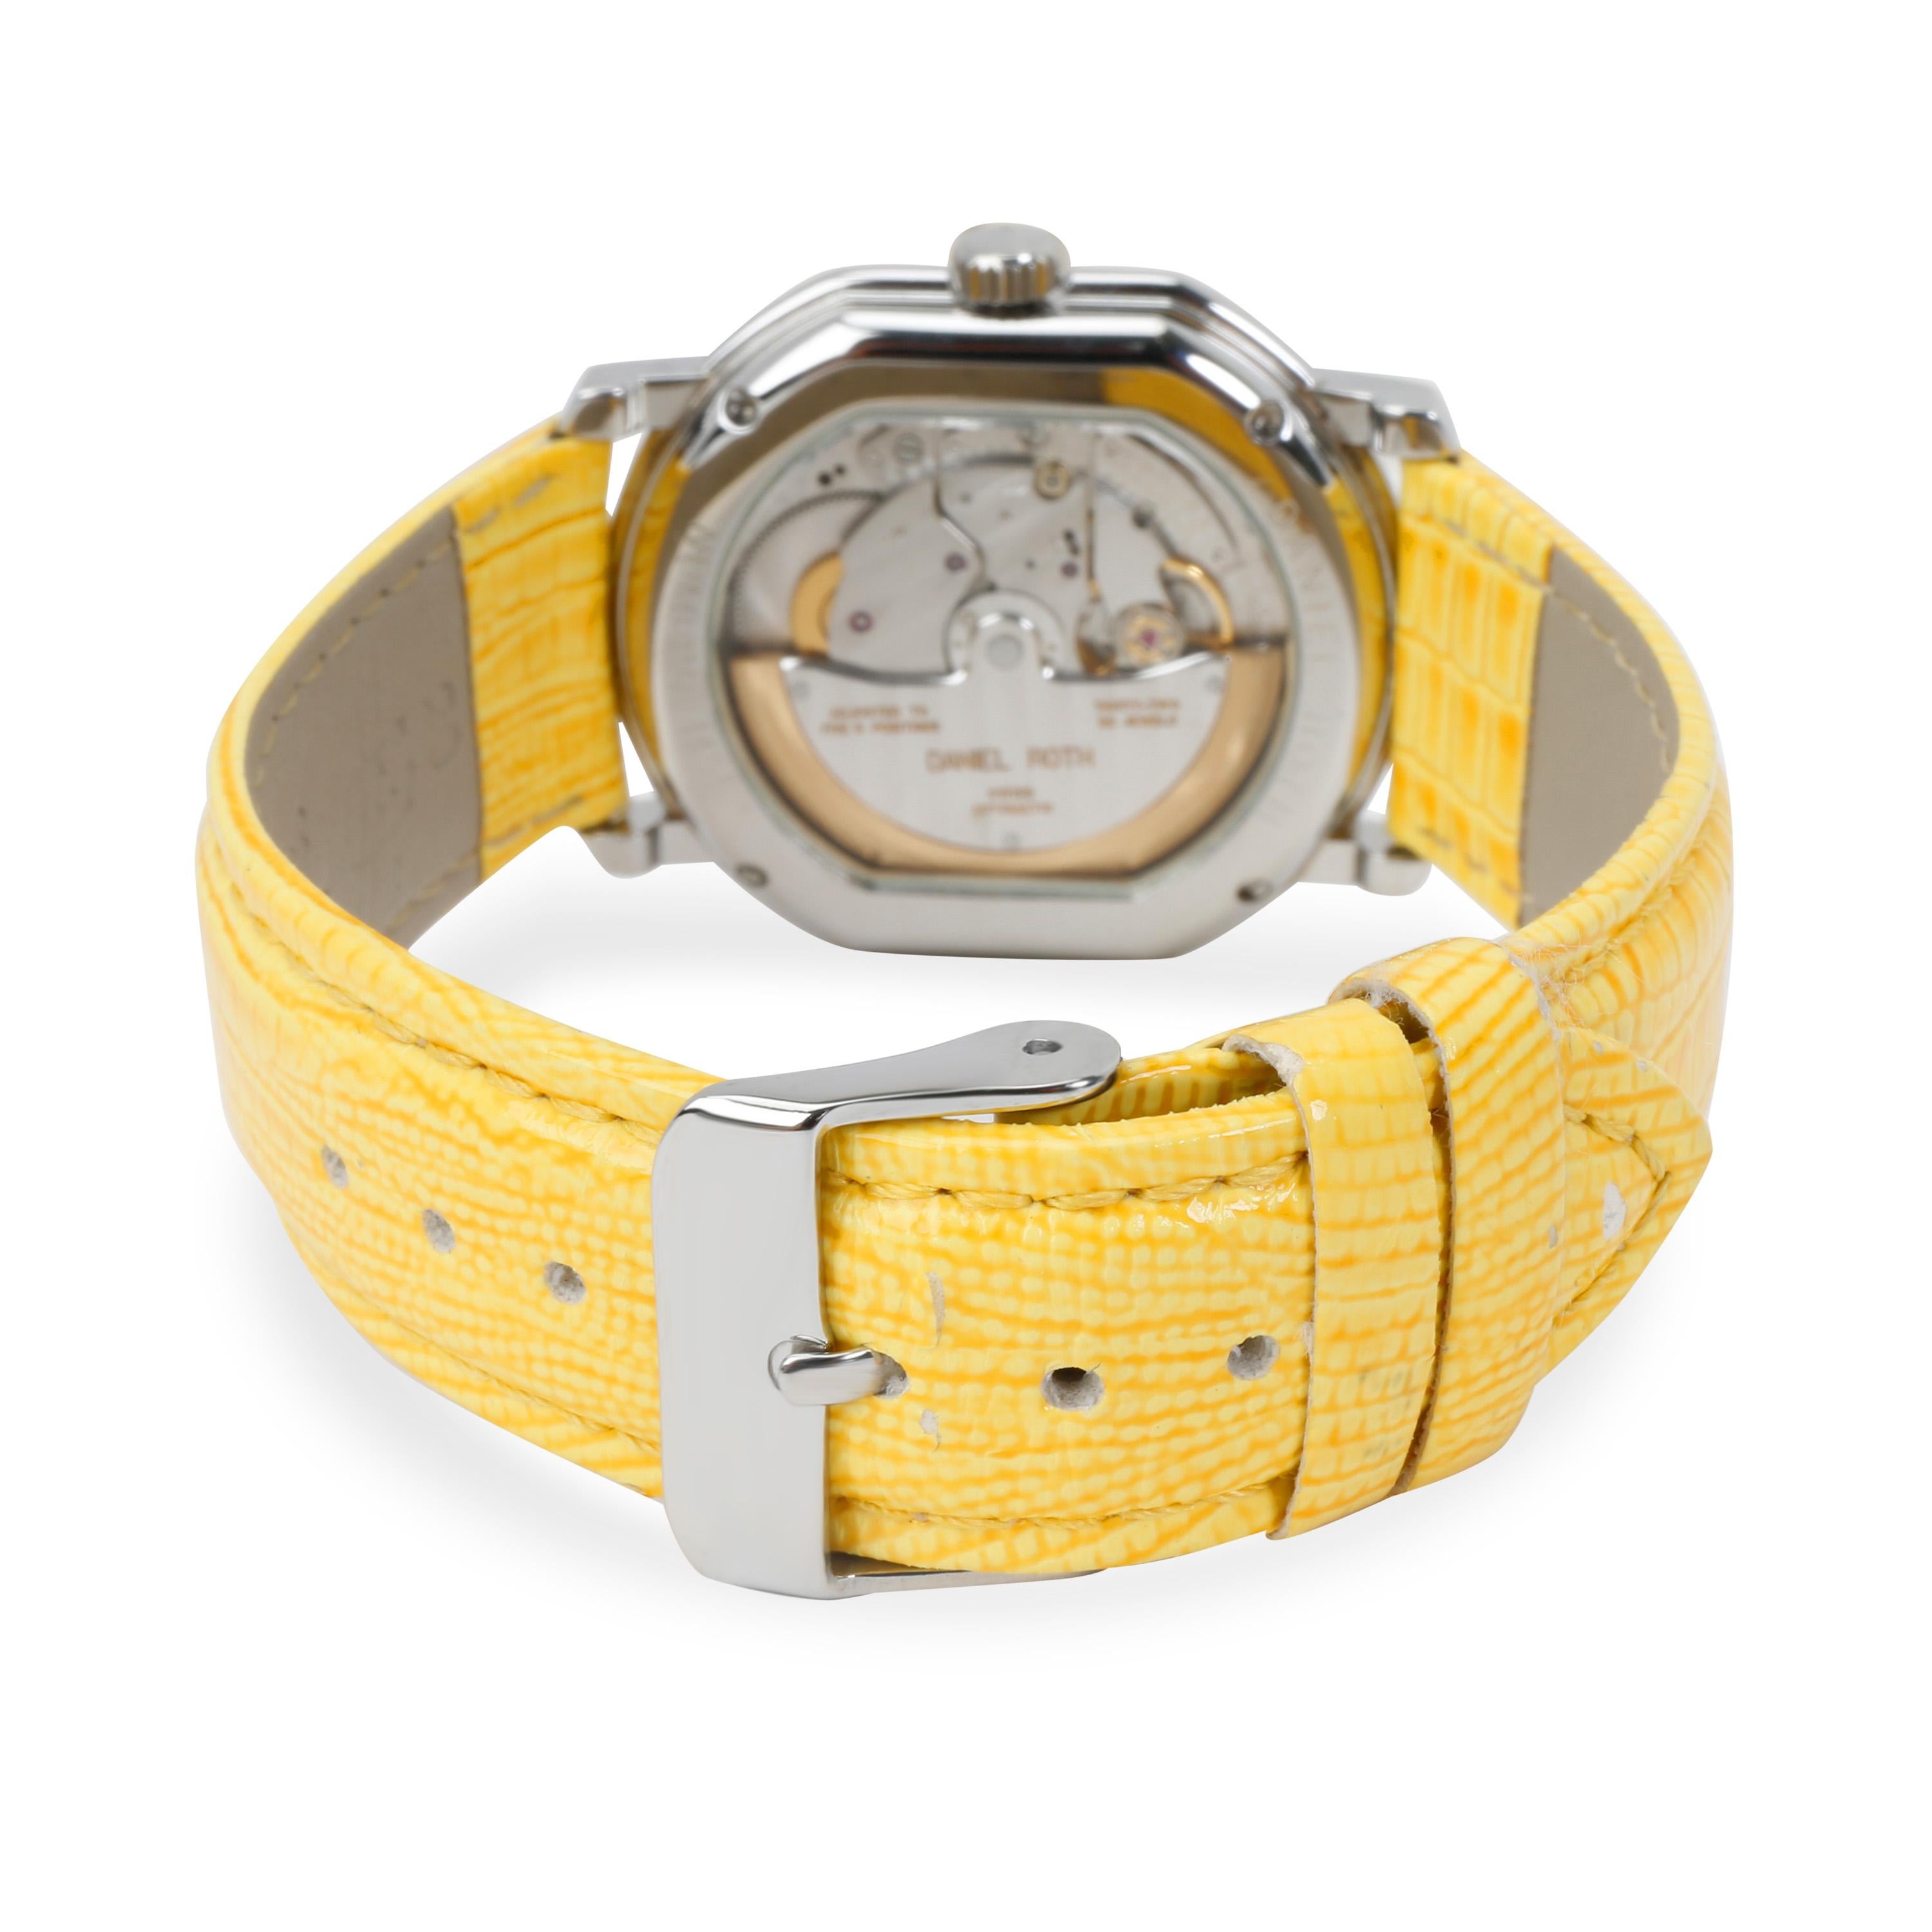 Daniel Roth Le Sentier Le Sentier Women's Watch in Stainless Steel

SKU: 097906

PRIMARY DETAILS
Brand:  Daniel Roth
Model: Le Sentier
Country of Origin: Switzerland
Movement Type: Mechanical: Automatic/Kinetic
Year Manufactured: 
Year of